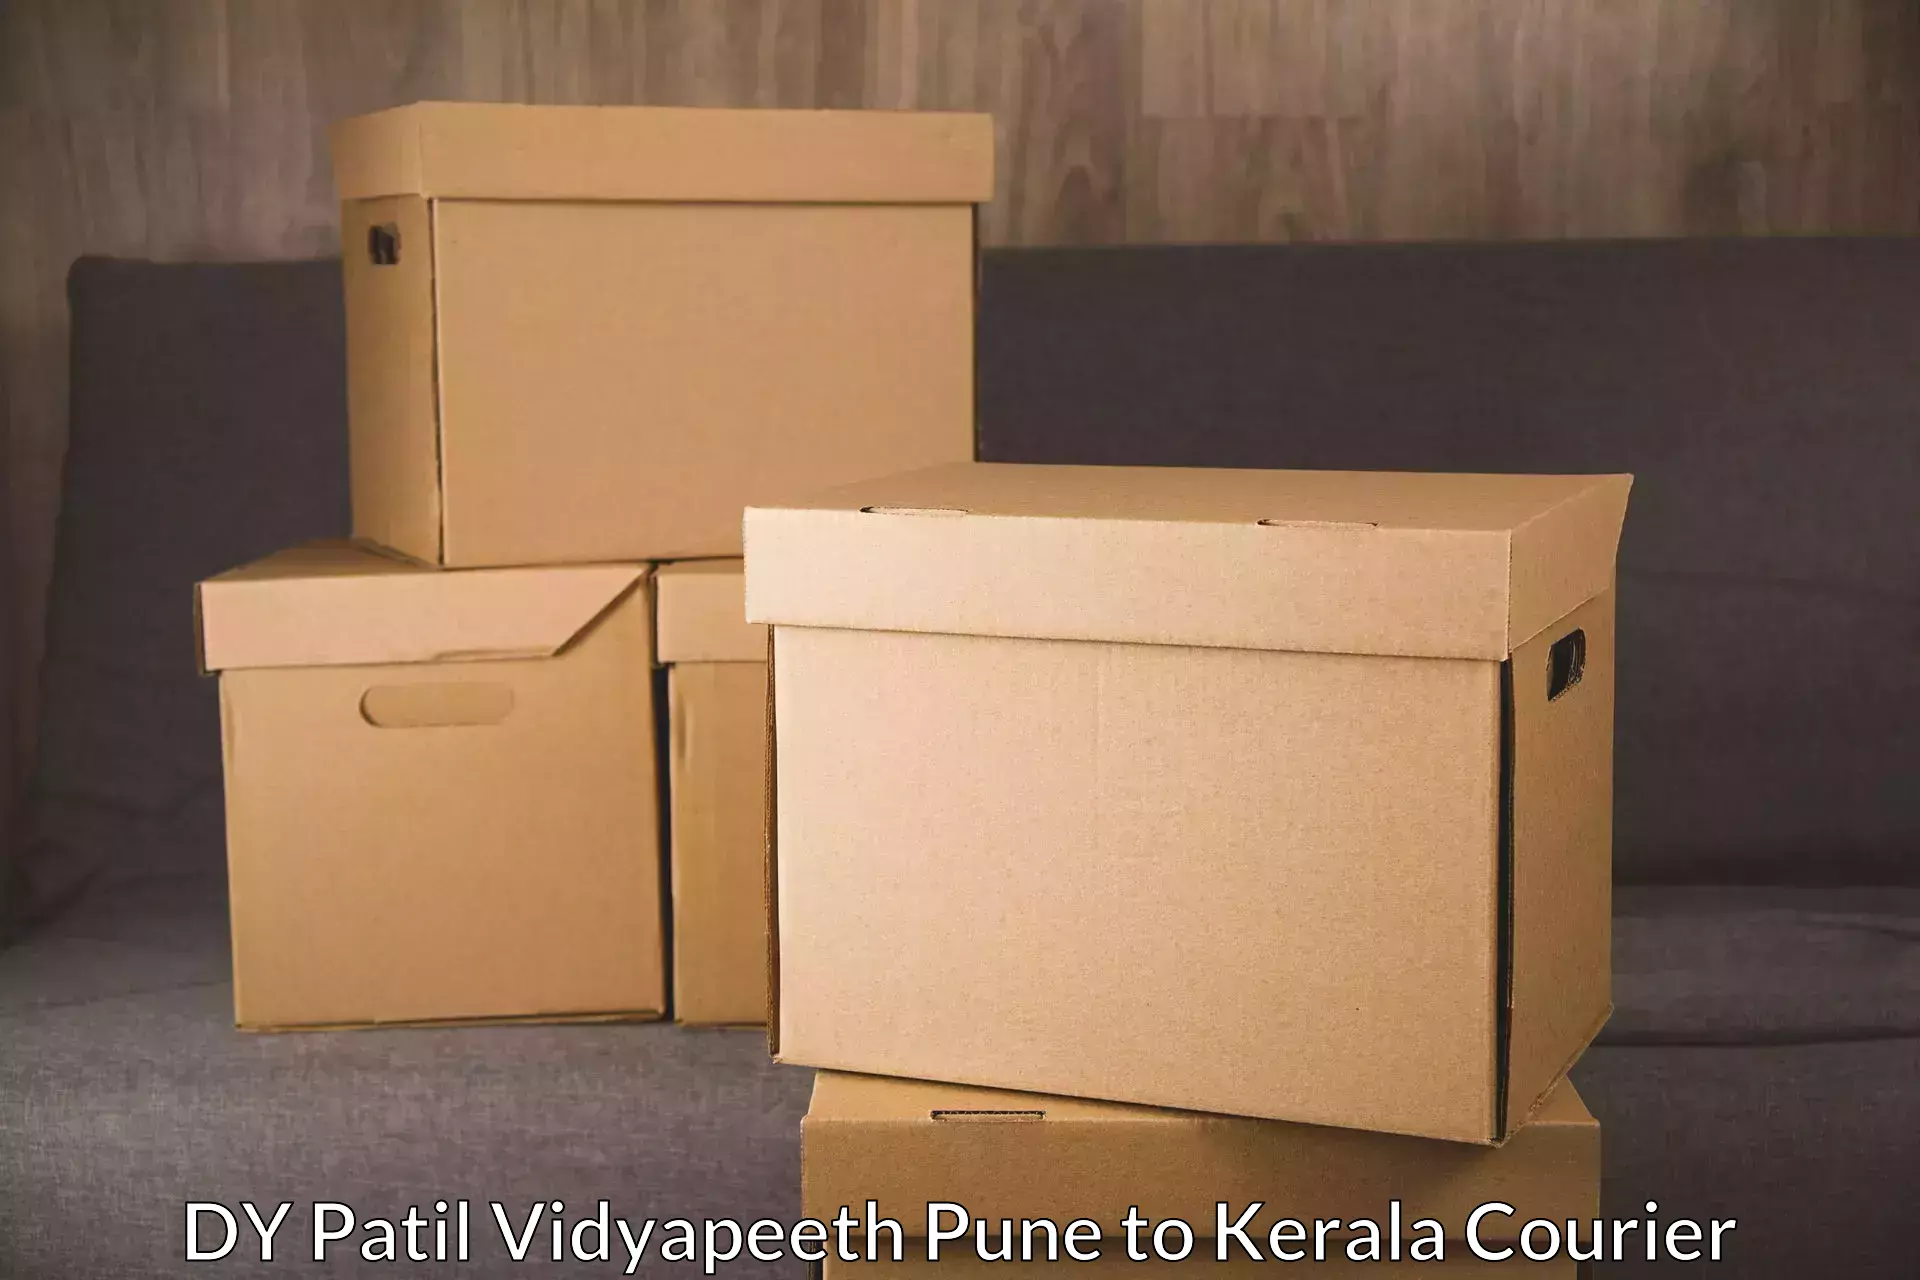 Express package transport in DY Patil Vidyapeeth Pune to Kattappana